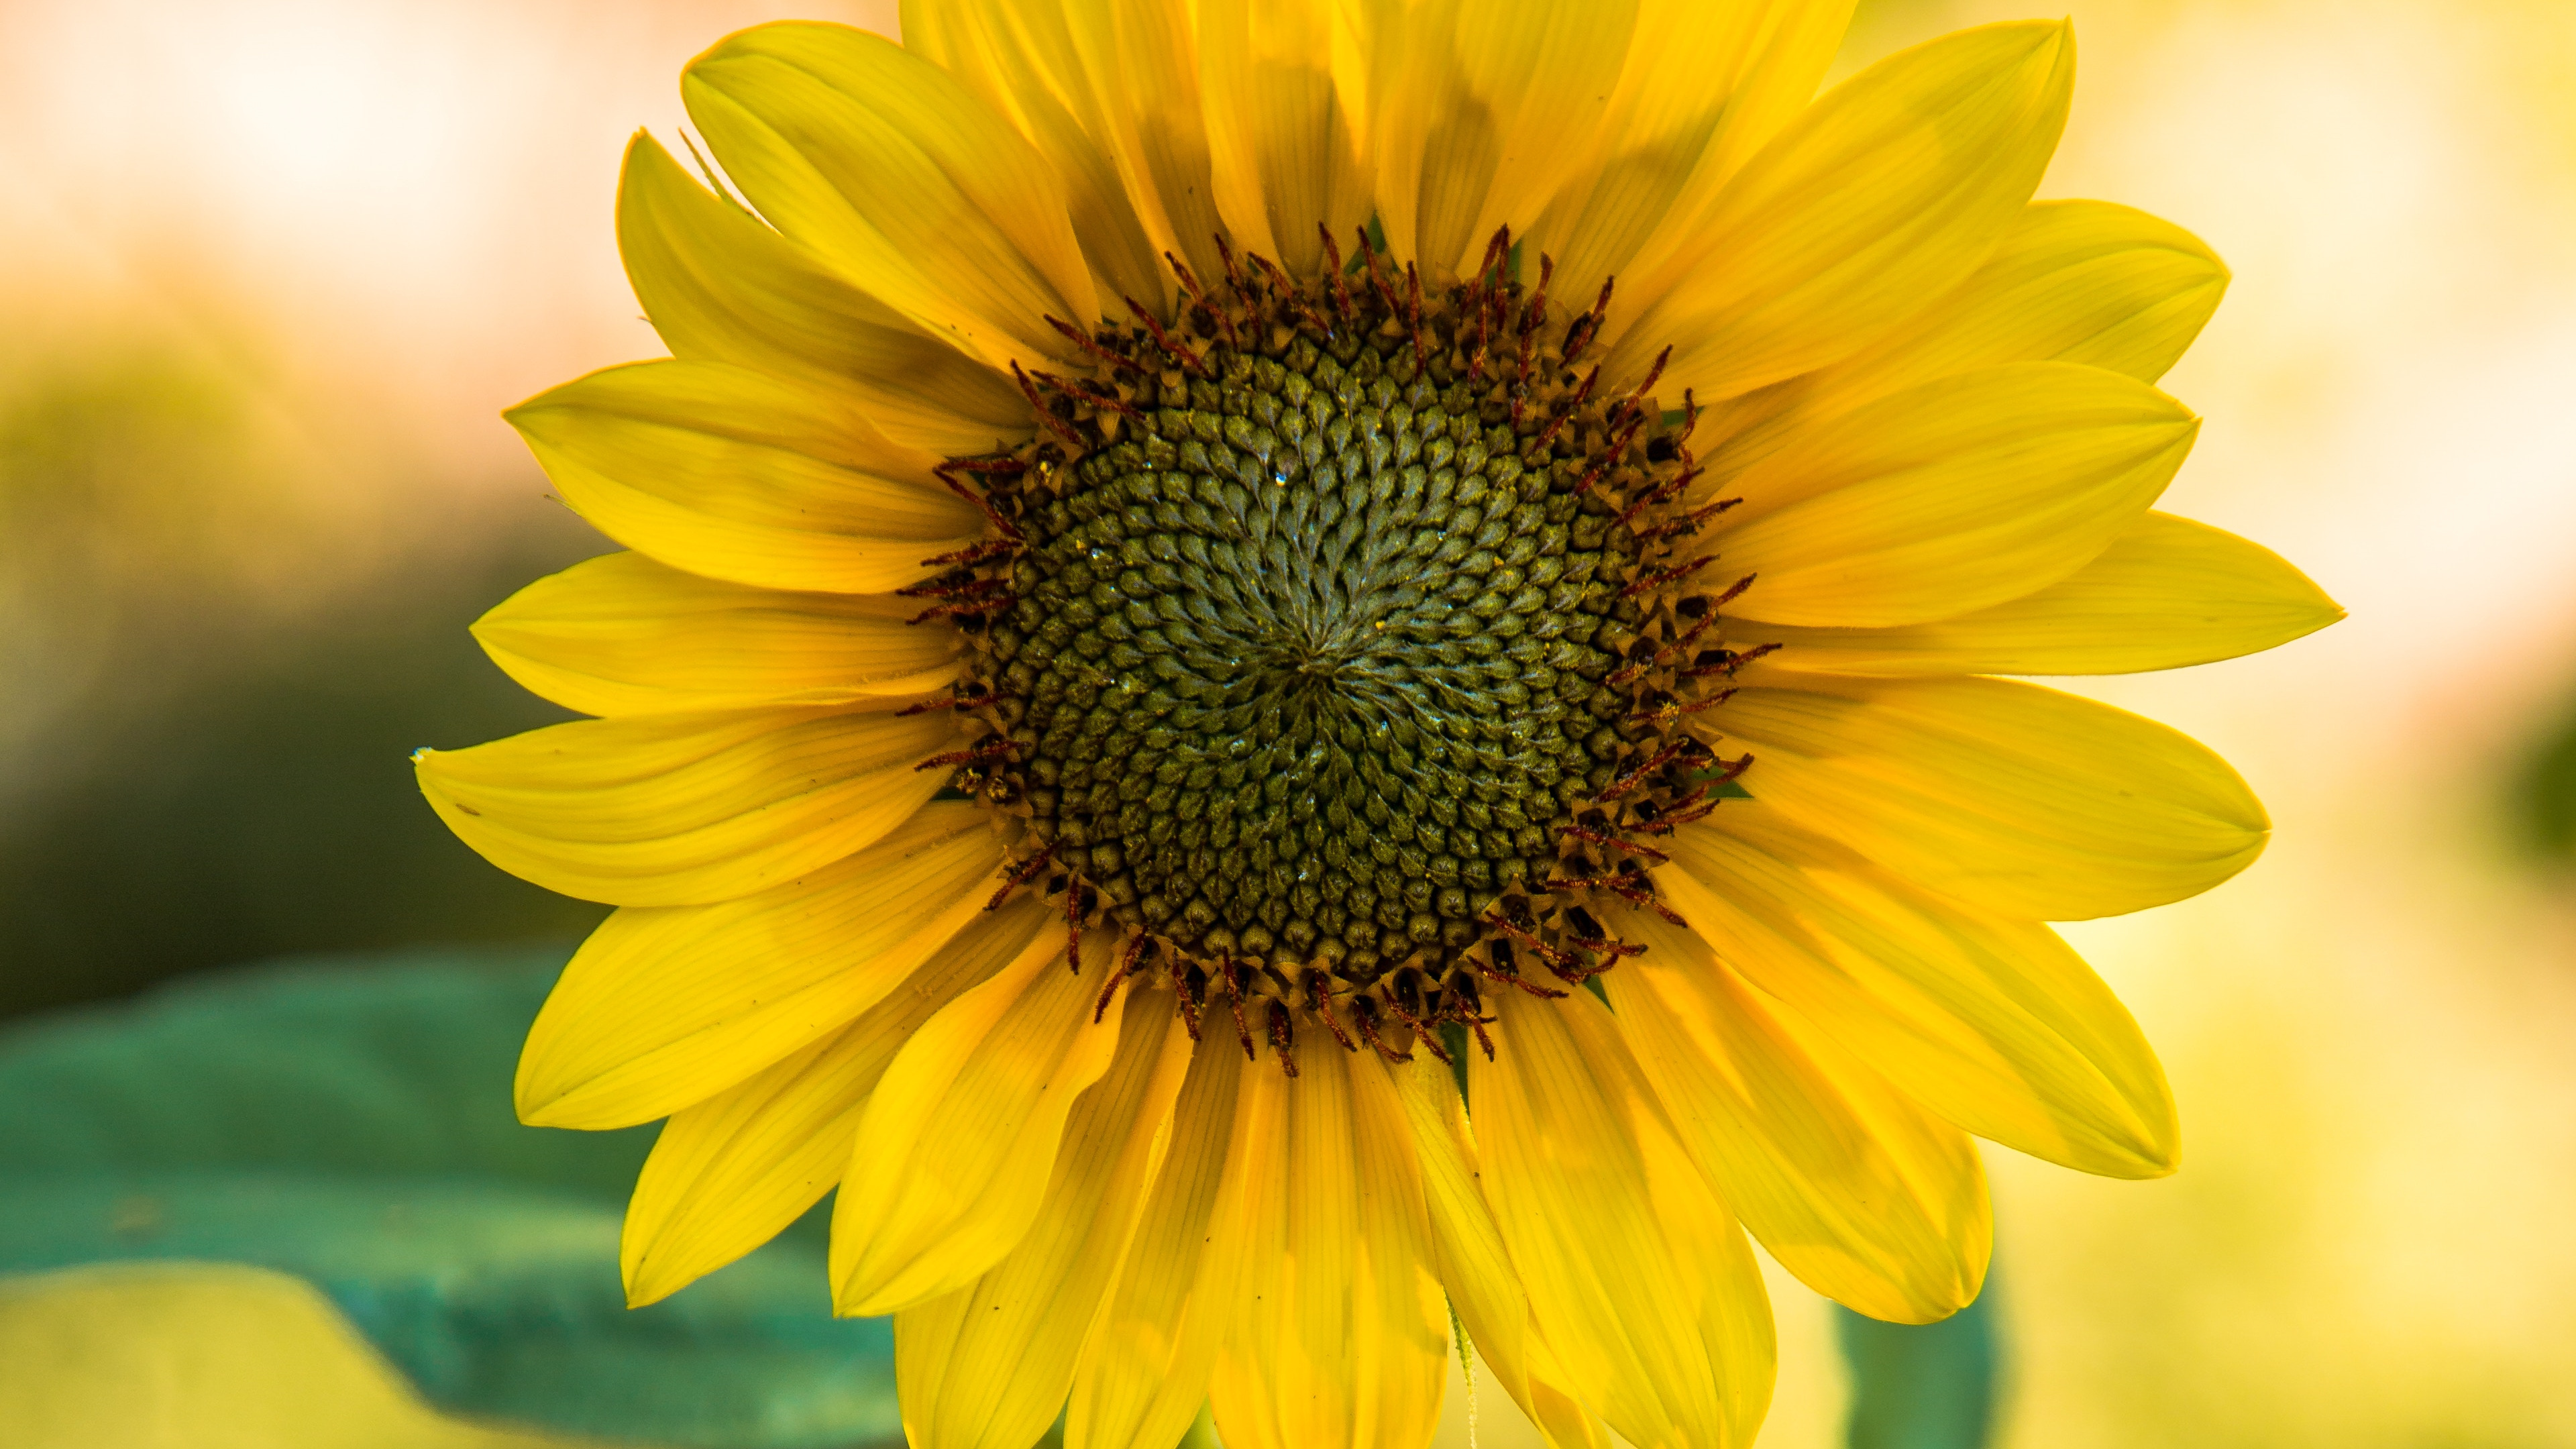 Yellow Sunflower in Close up Photography. Wallpaper in 3840x2160 Resolution